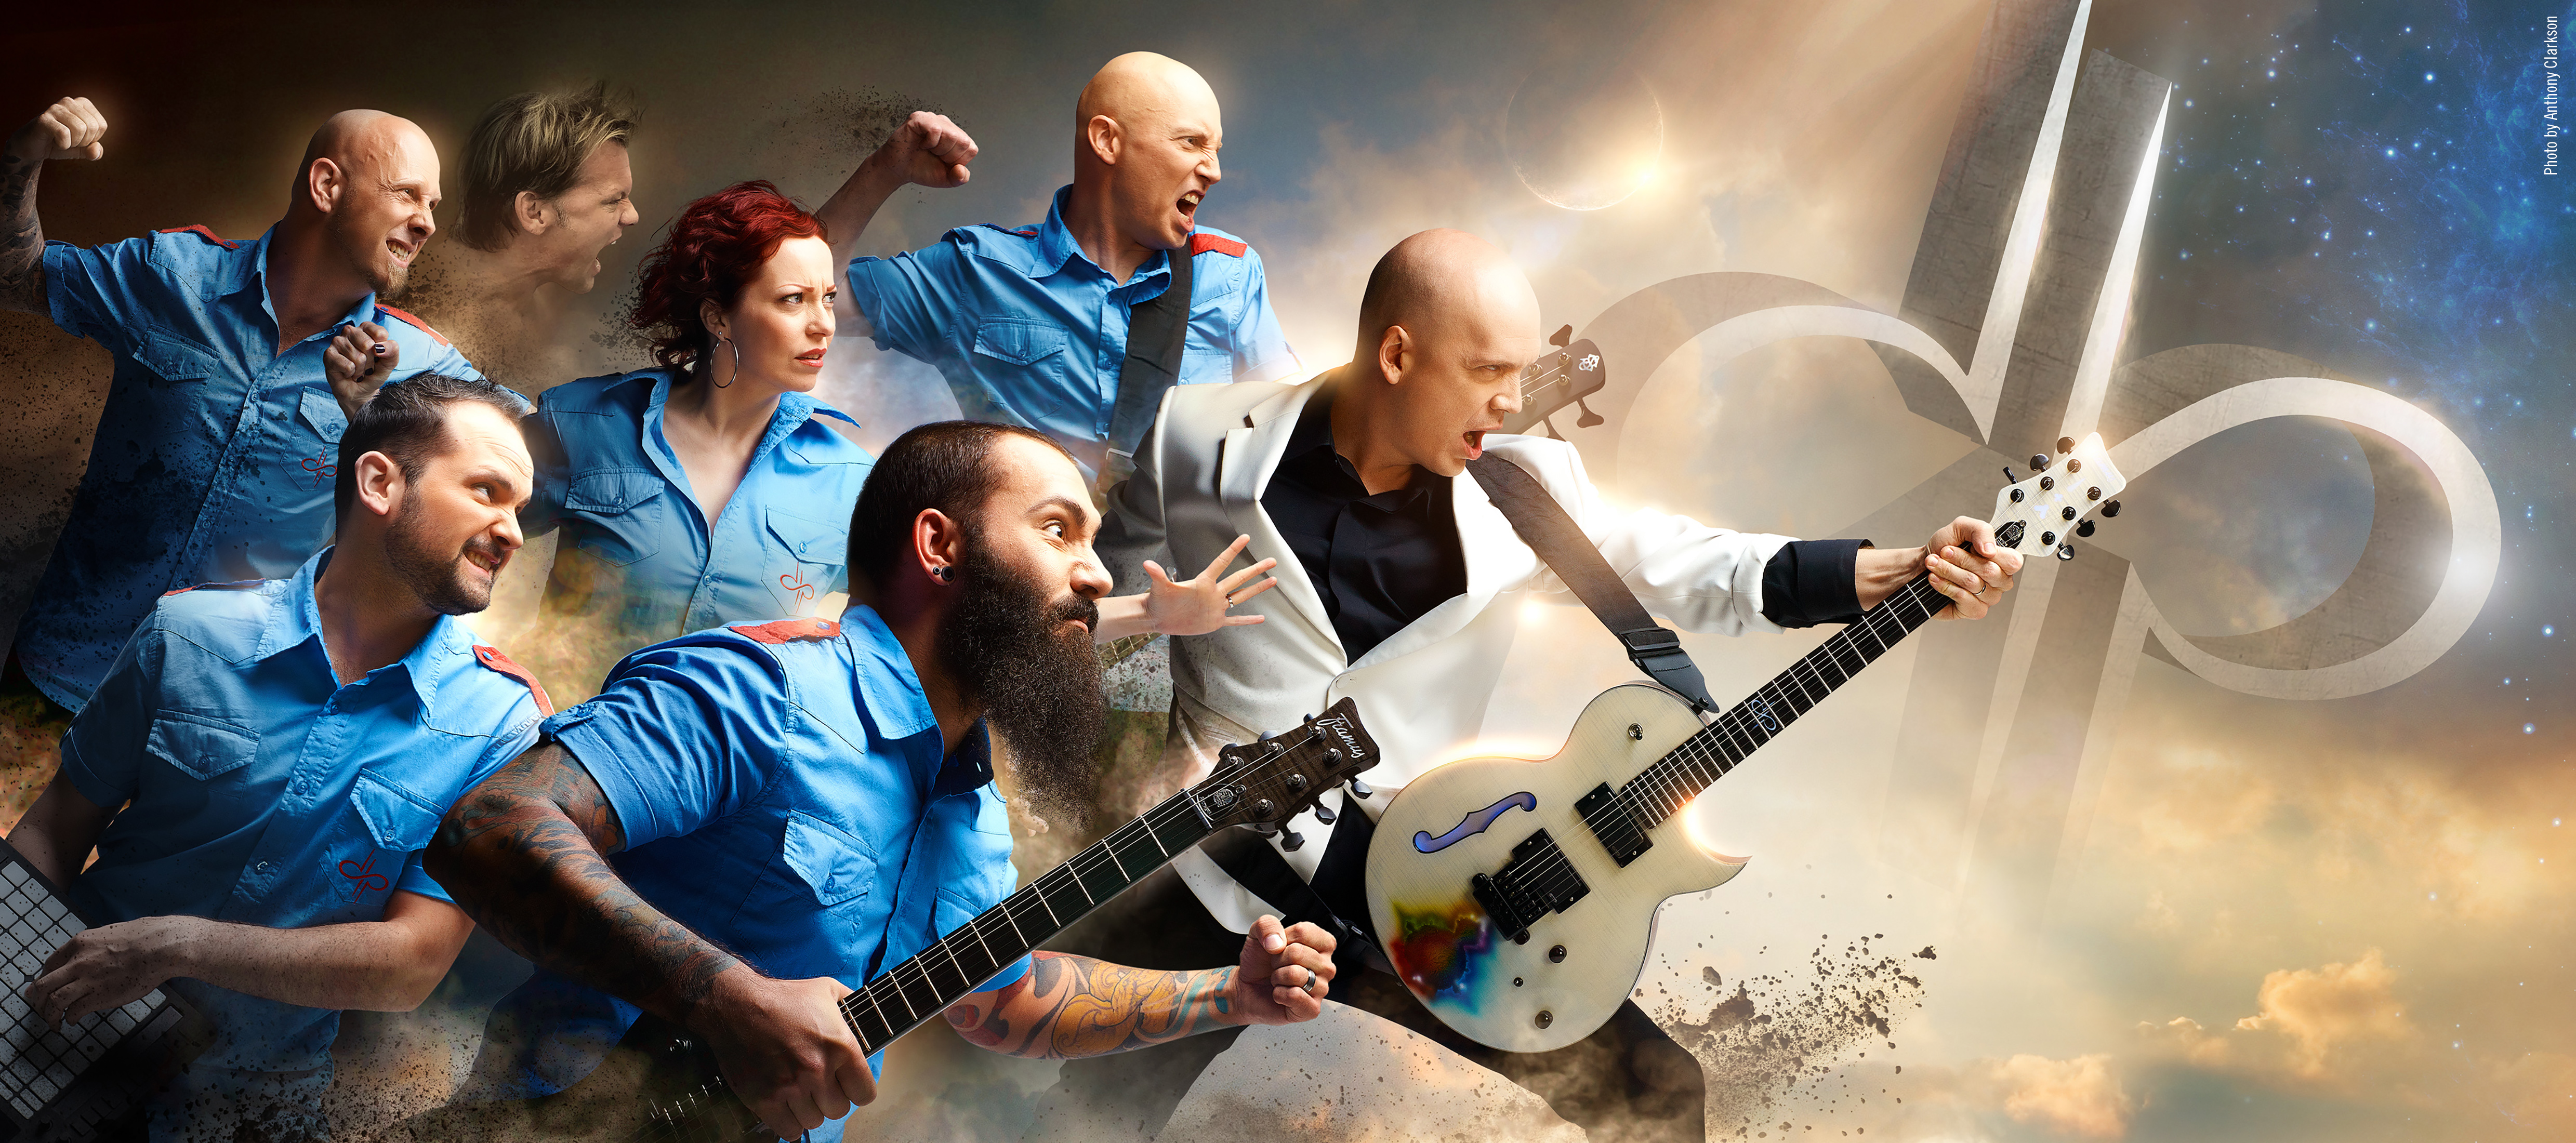 band-photo-devin-townsend-project.jpg